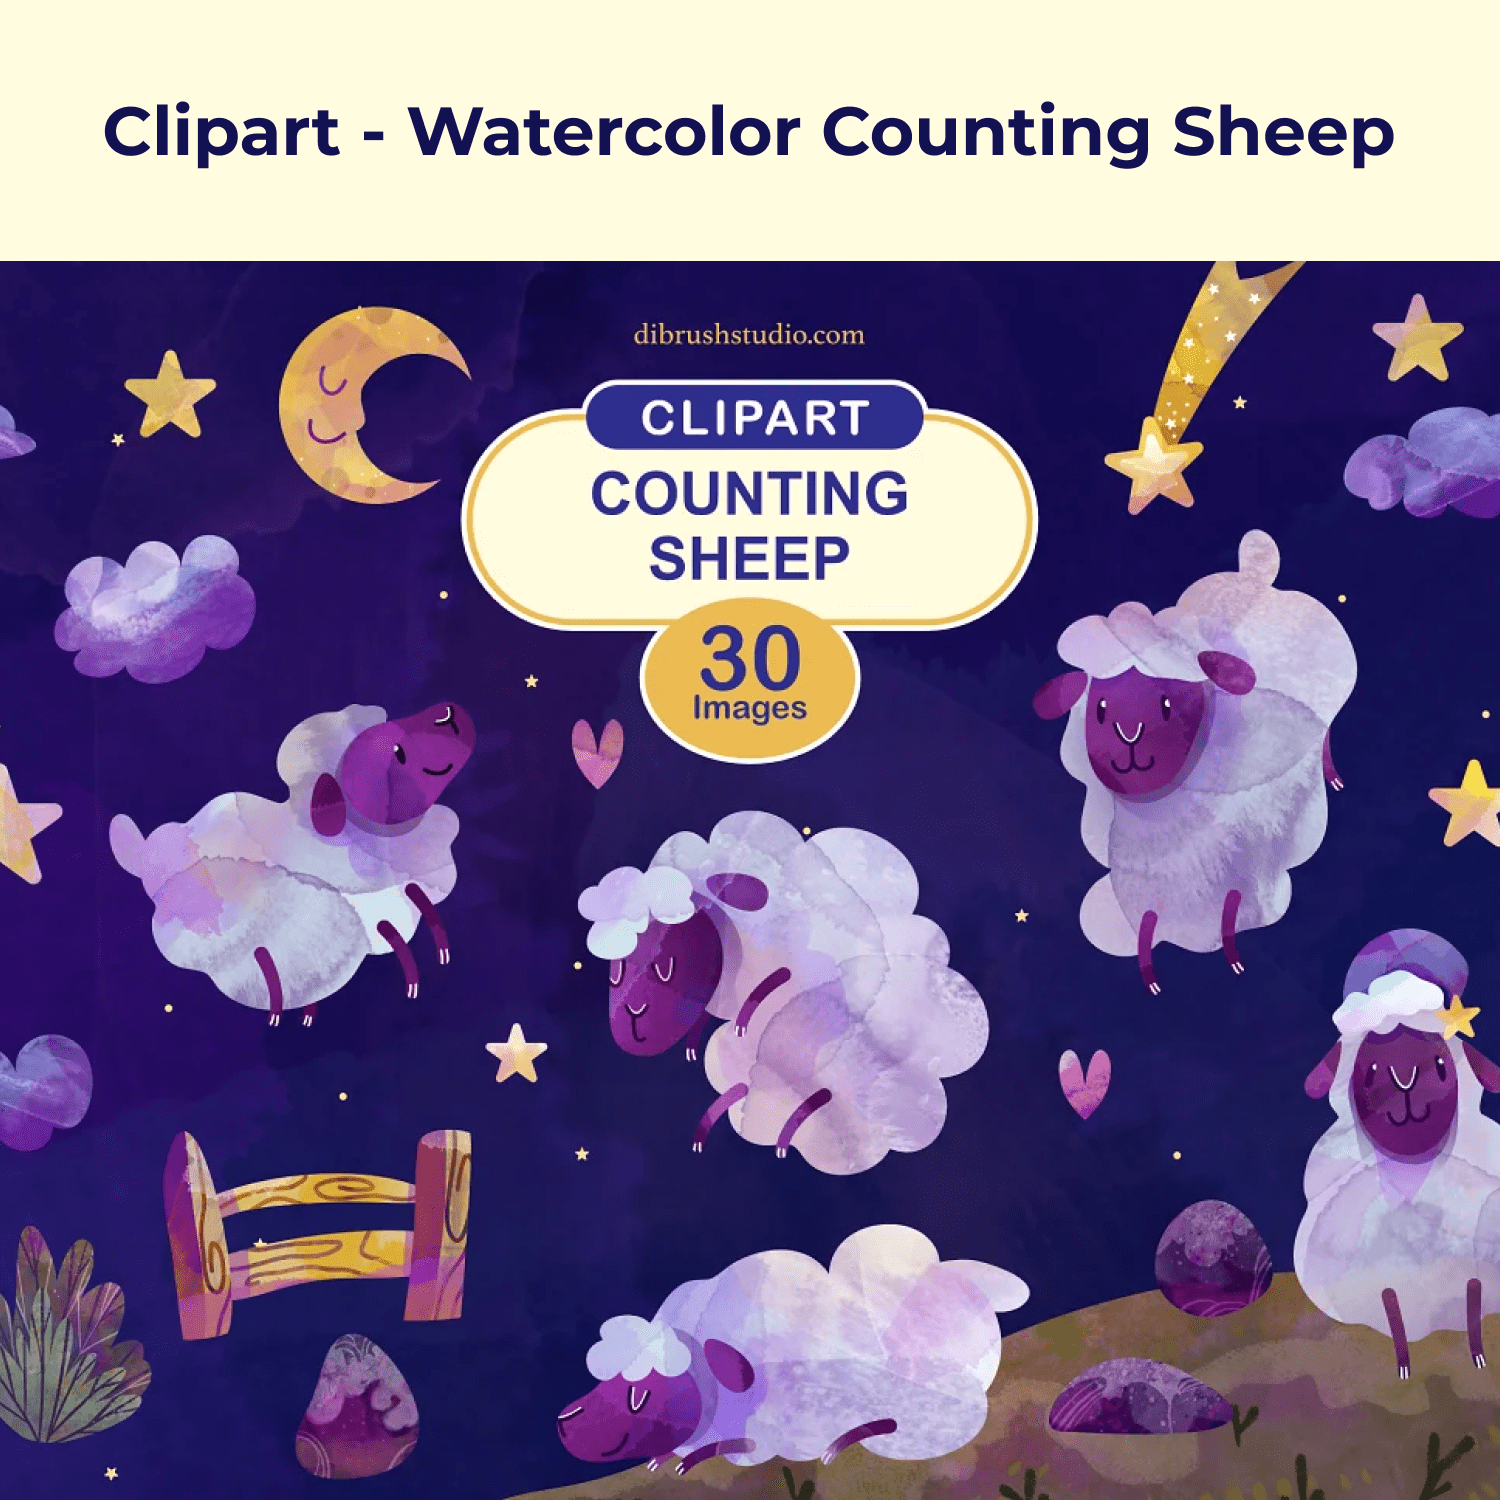 Clipart - Watercolor Counting Sheep.